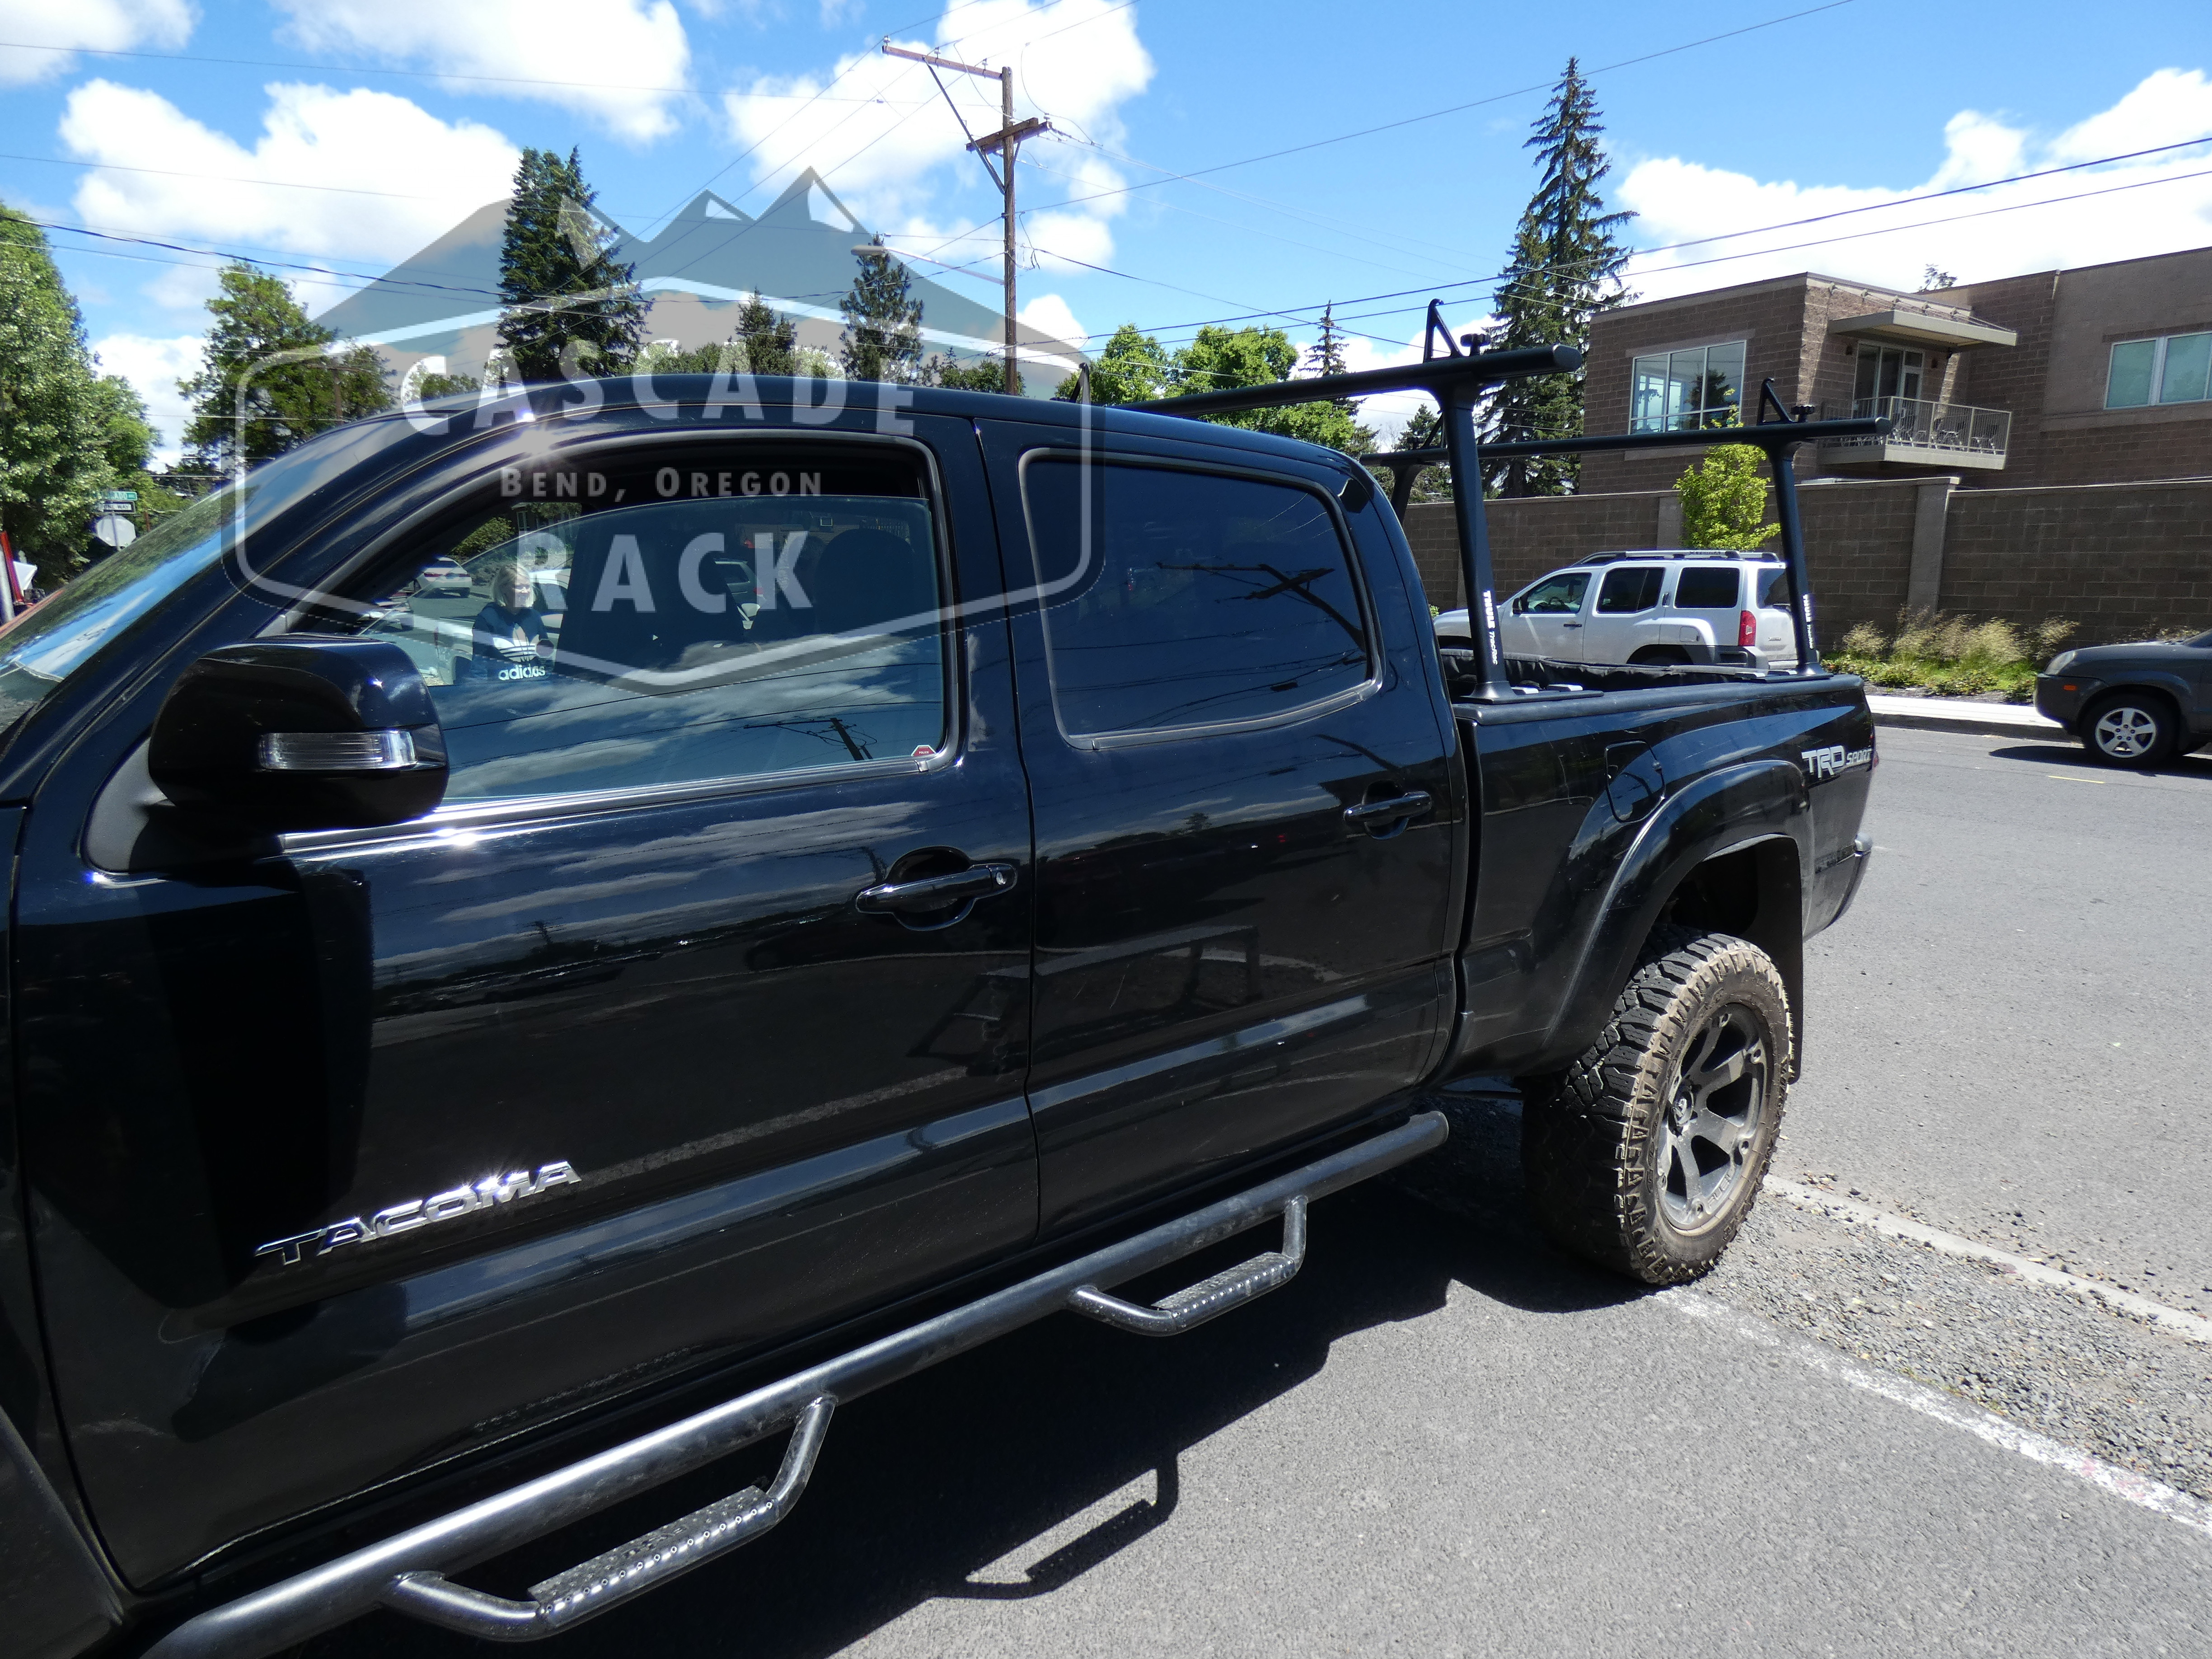 2015 Toyota Tacoma - Truck Bed Rack - Thule